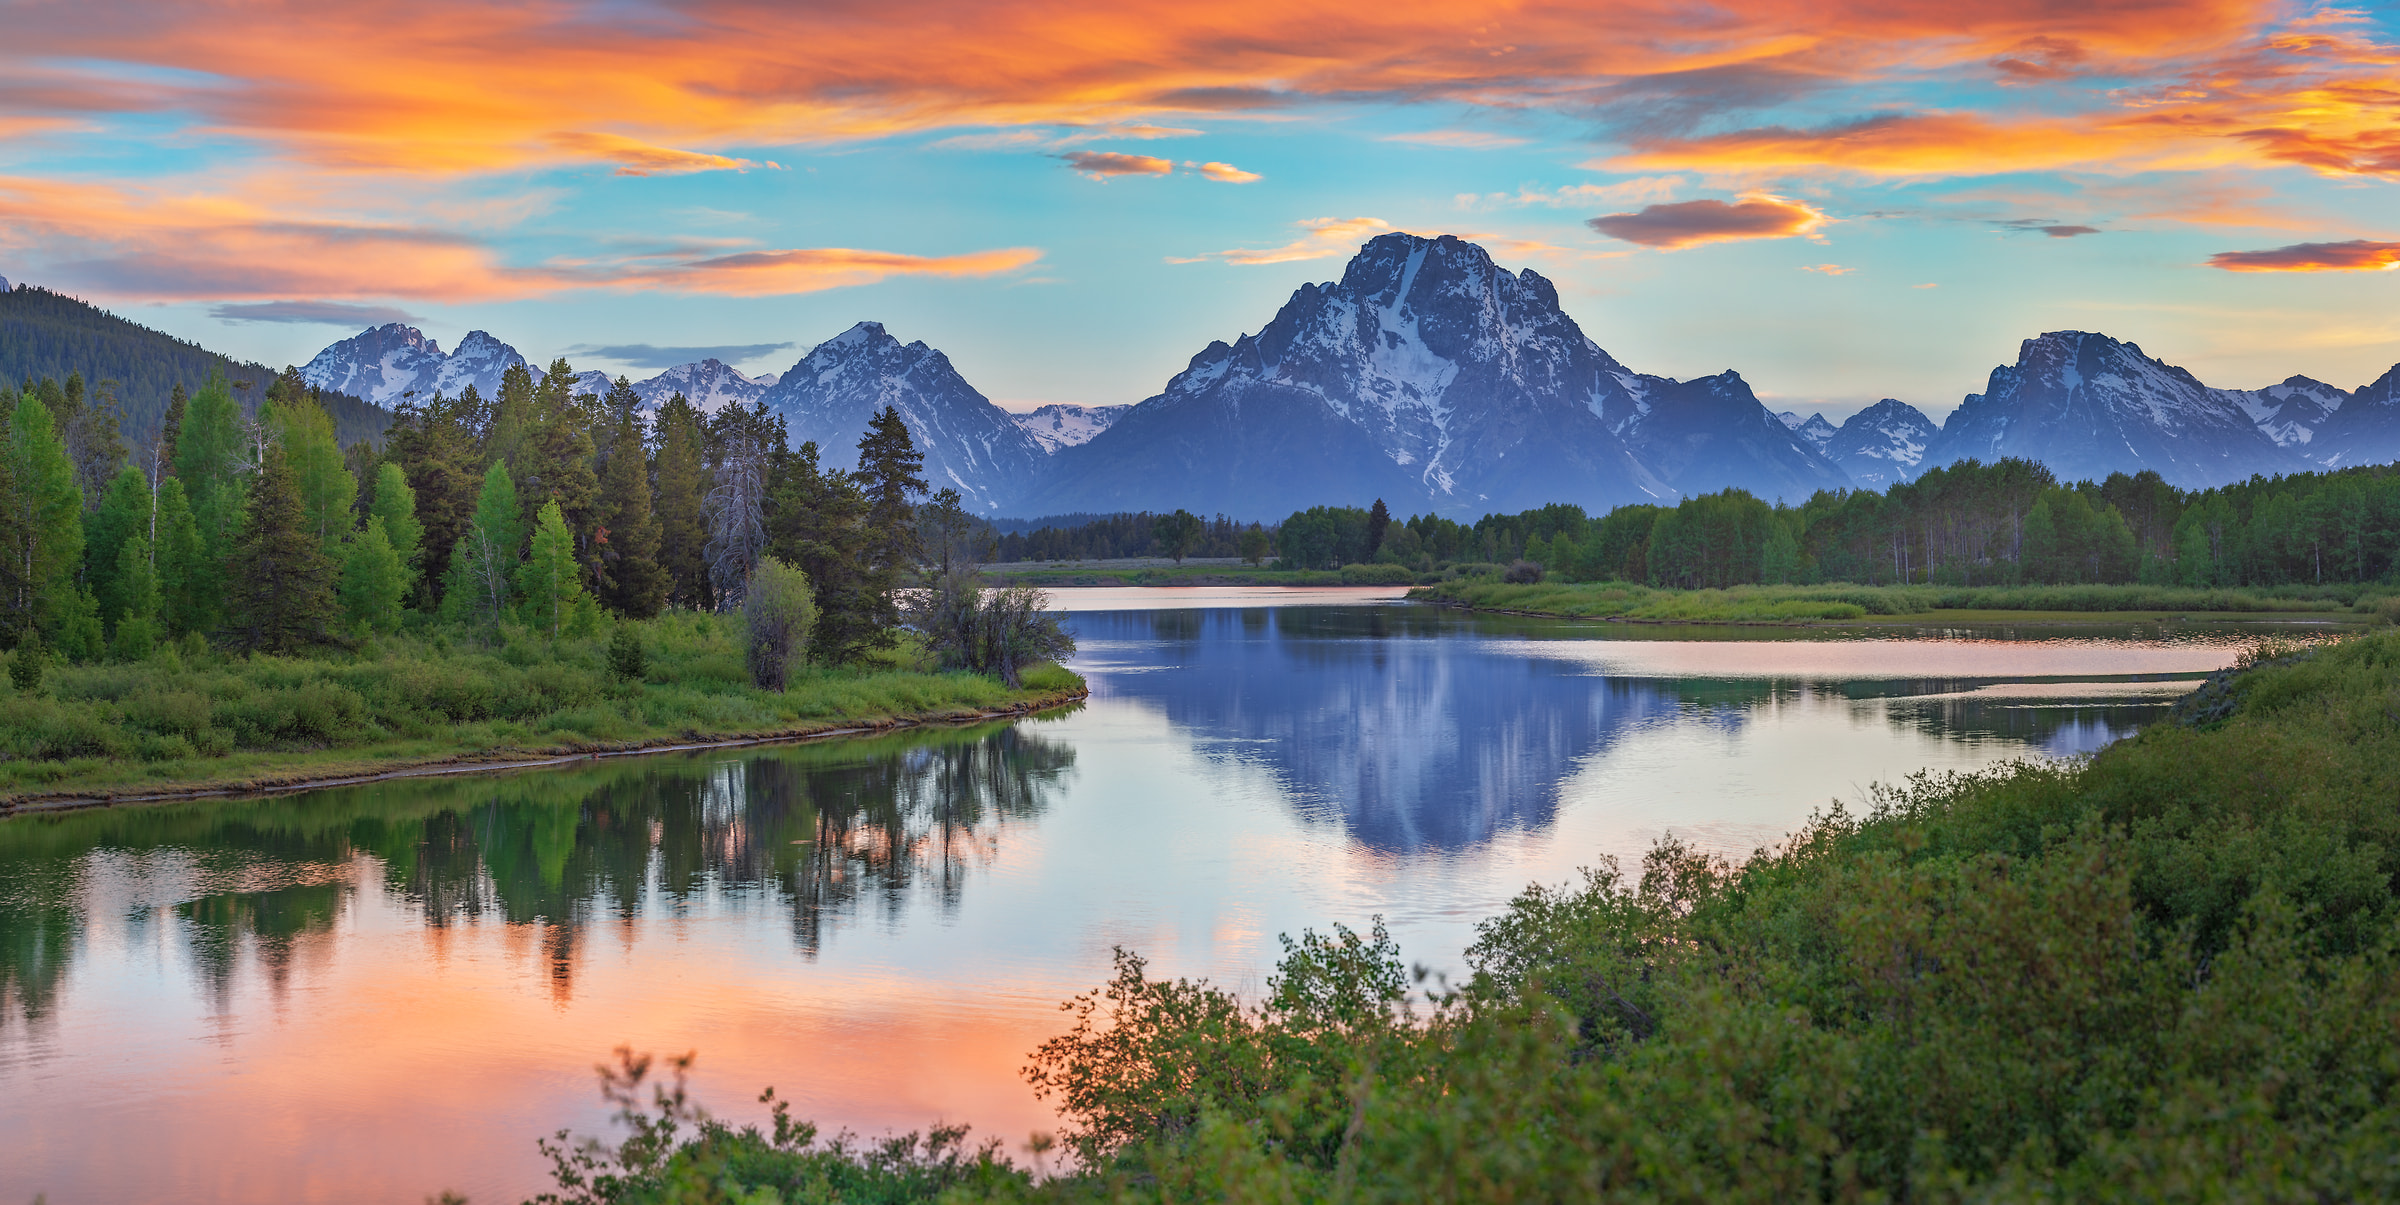 101 megapixels! A very high resolution, large-format VAST photo print of a sunset landscape with mountains, a river, and trees; photograph created by John Freeman in Oxbow Bend, Grand Tetons National Park, Wyoming.